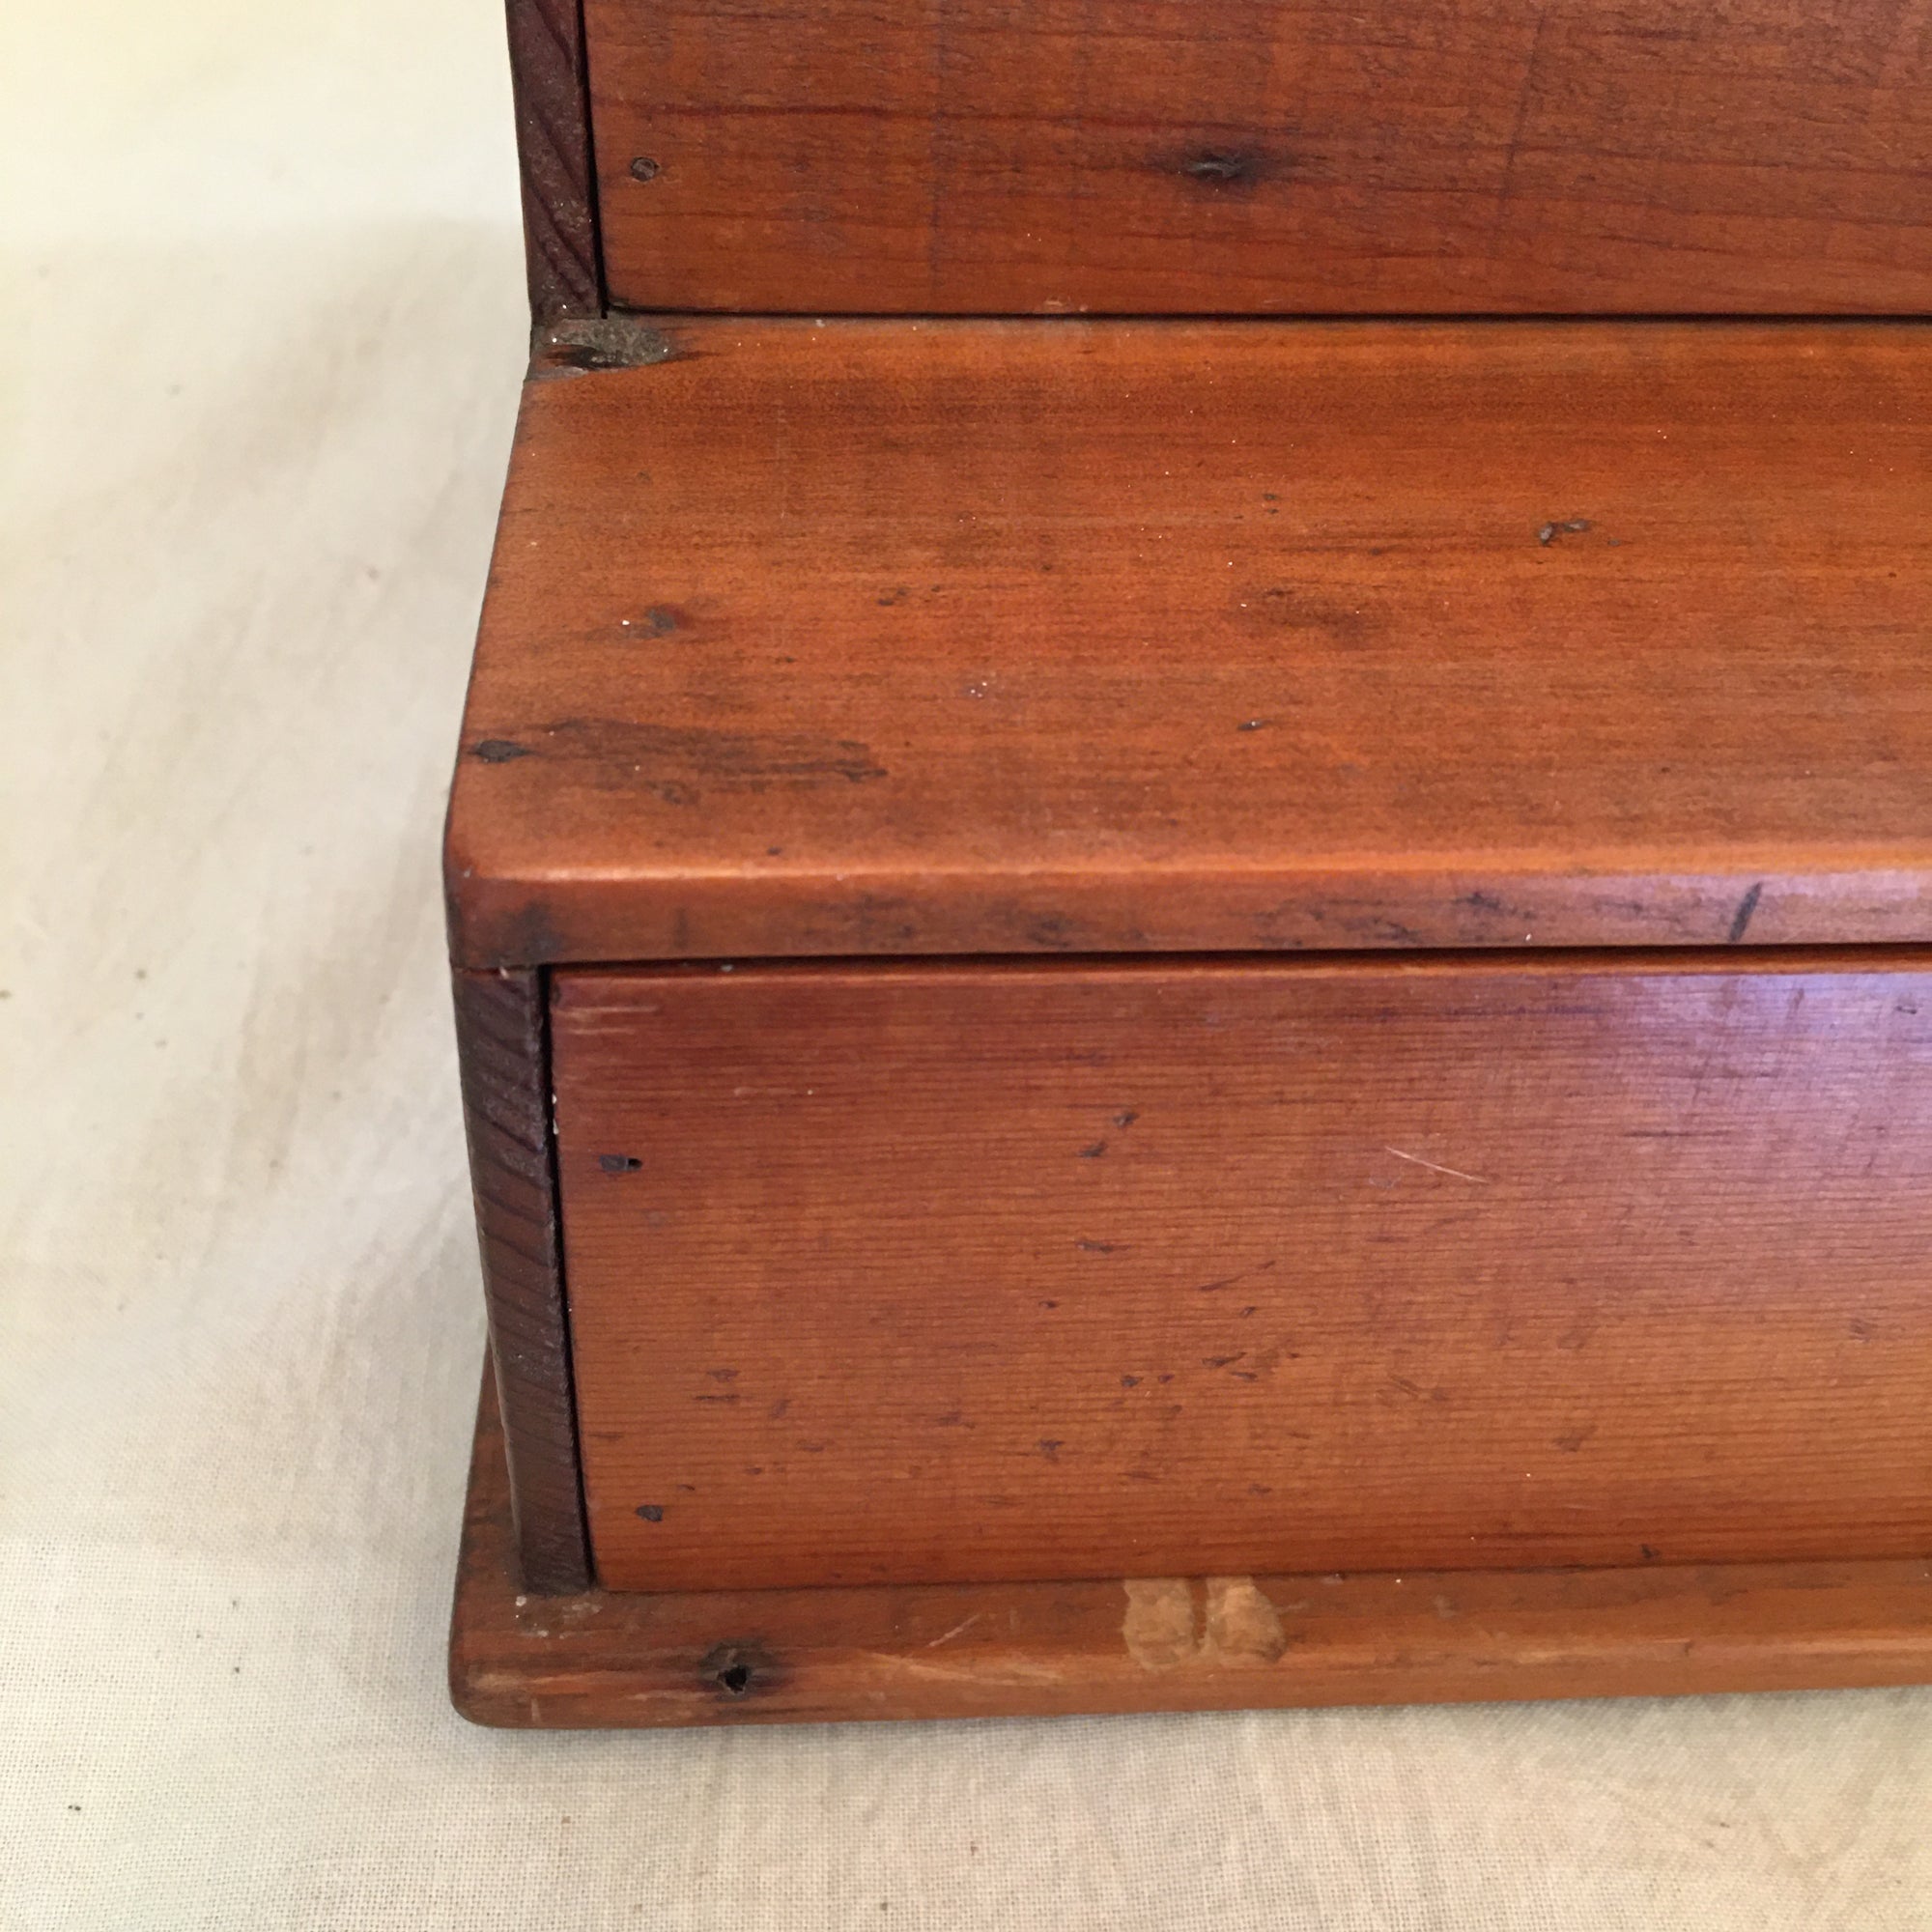 Early 1900’s Large Sewing Box with Spindles for Spools, 2 Drawers, Pin Cushion